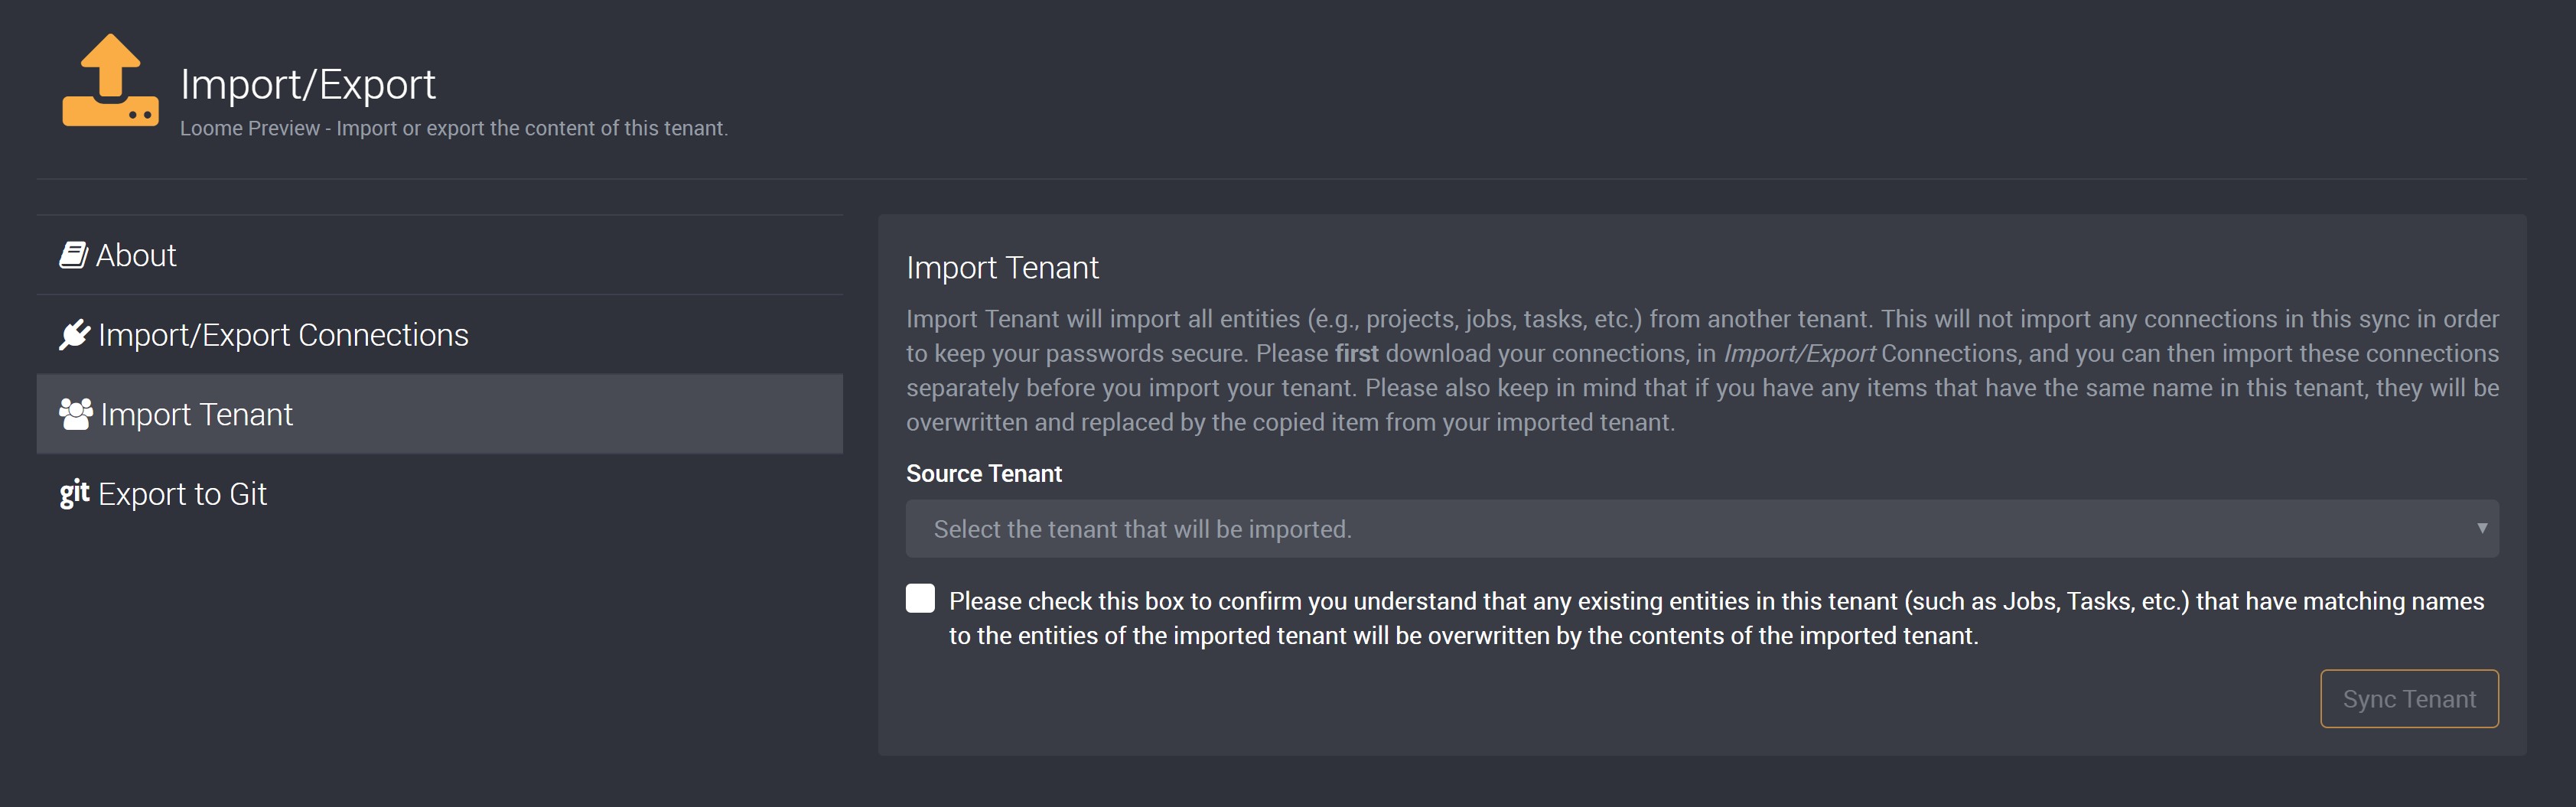 Import a tenant here